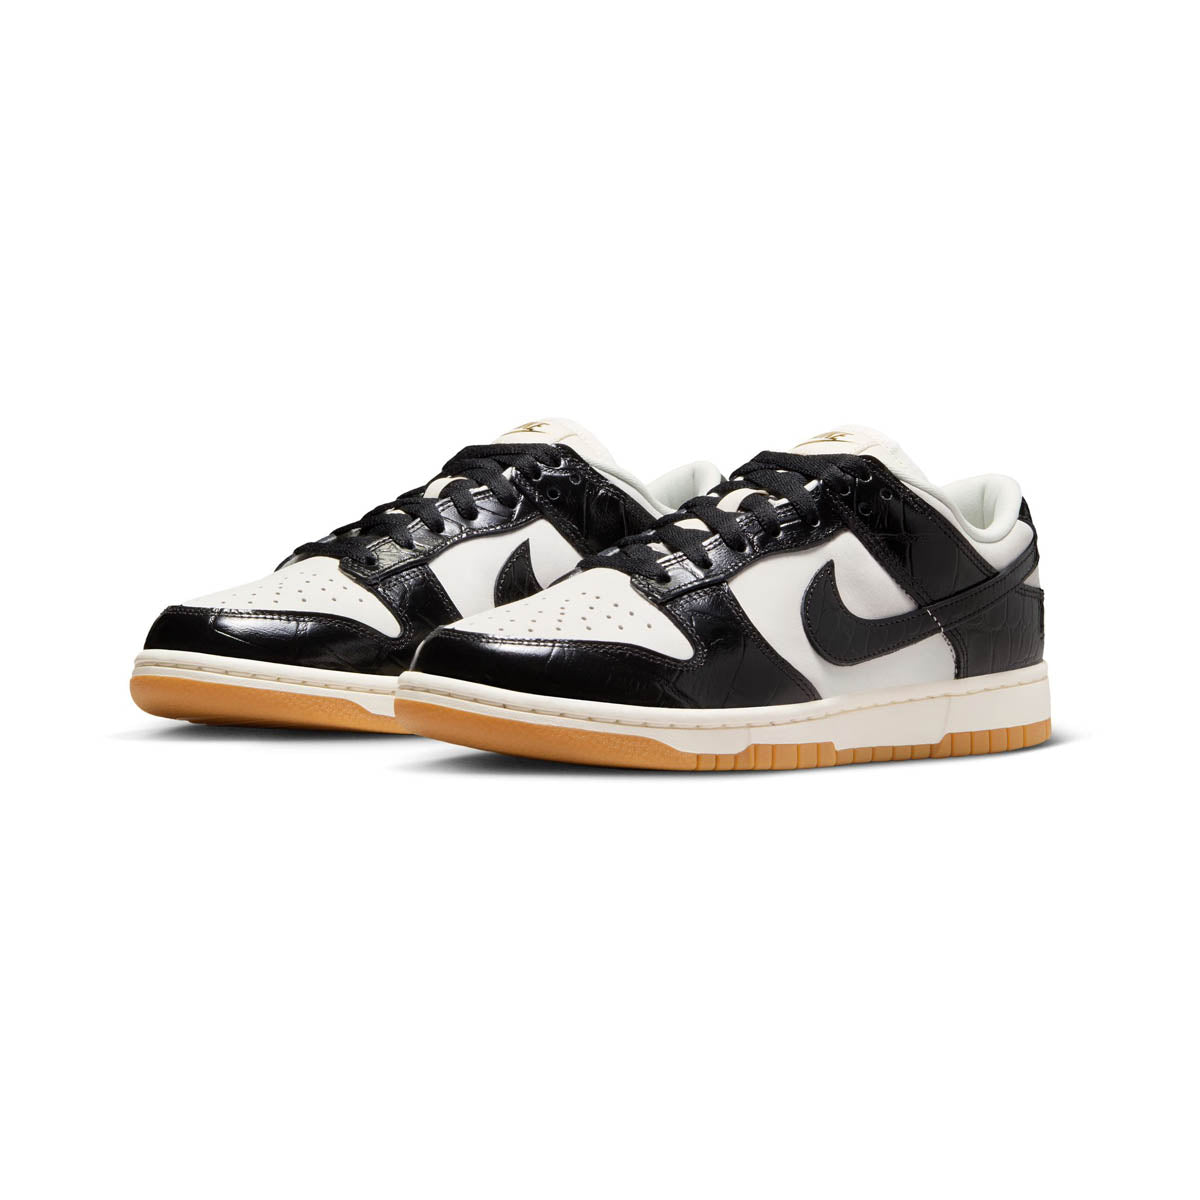 nike air force 1 low sail beige navy blue Women's Shoes